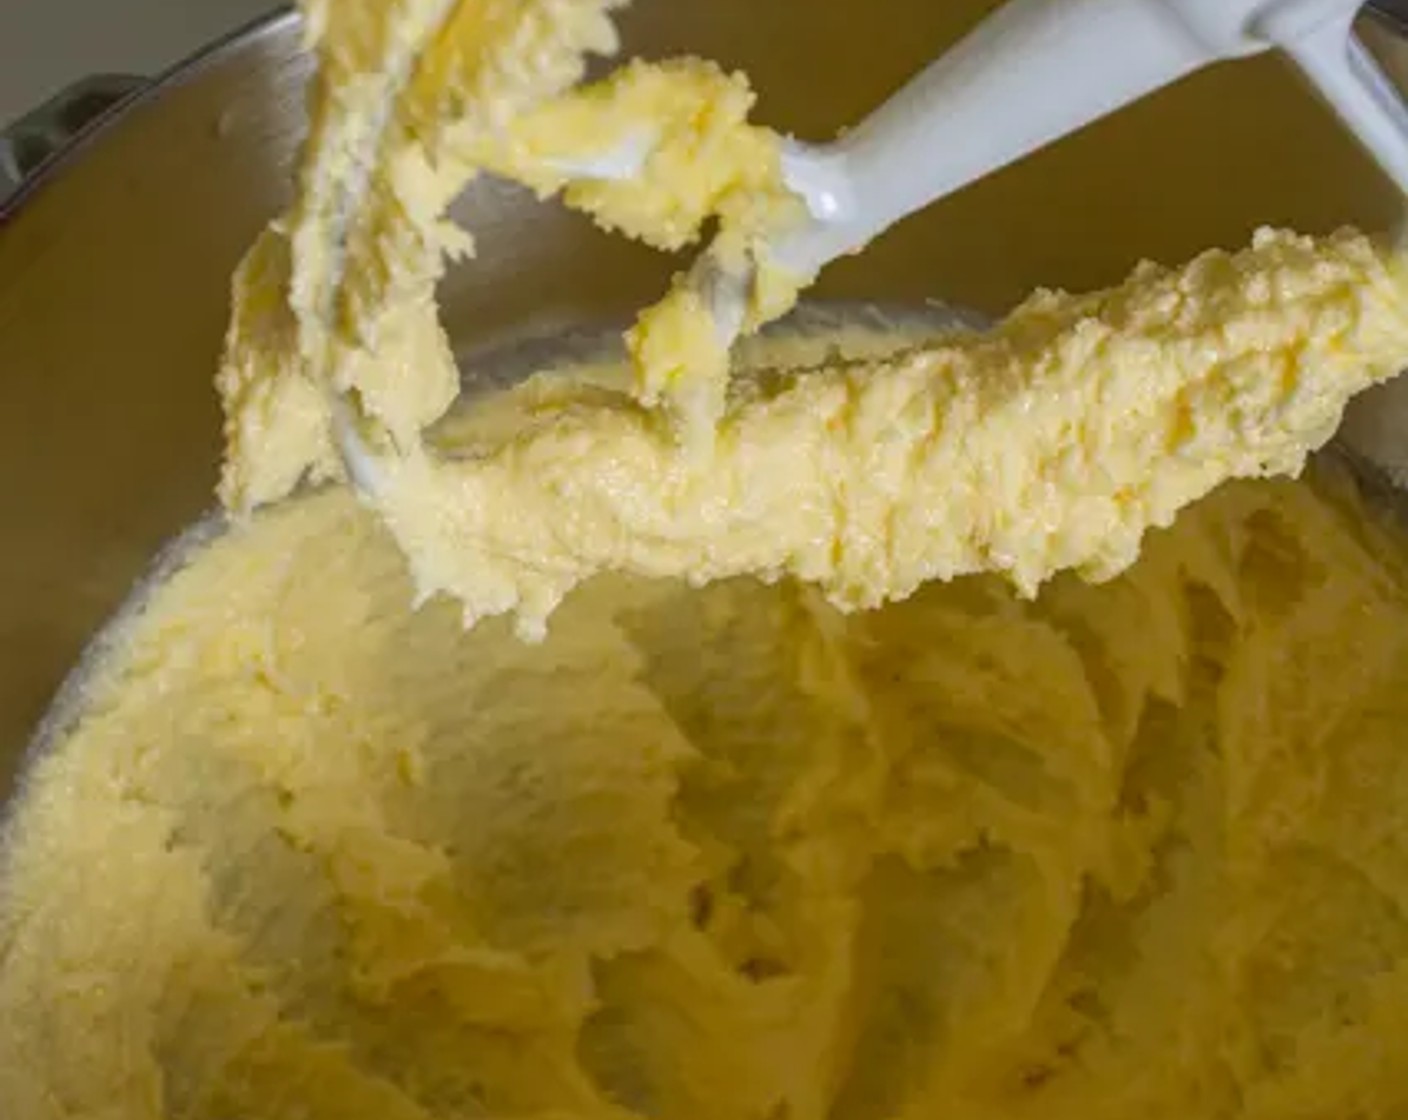 step 2 Place Butter (2 sticks) and Granulated Sugar (1 cup) in a mixing bowl. Cream the butter and sugar with a hand or stand mixer at medium speed for about 2 minutes.